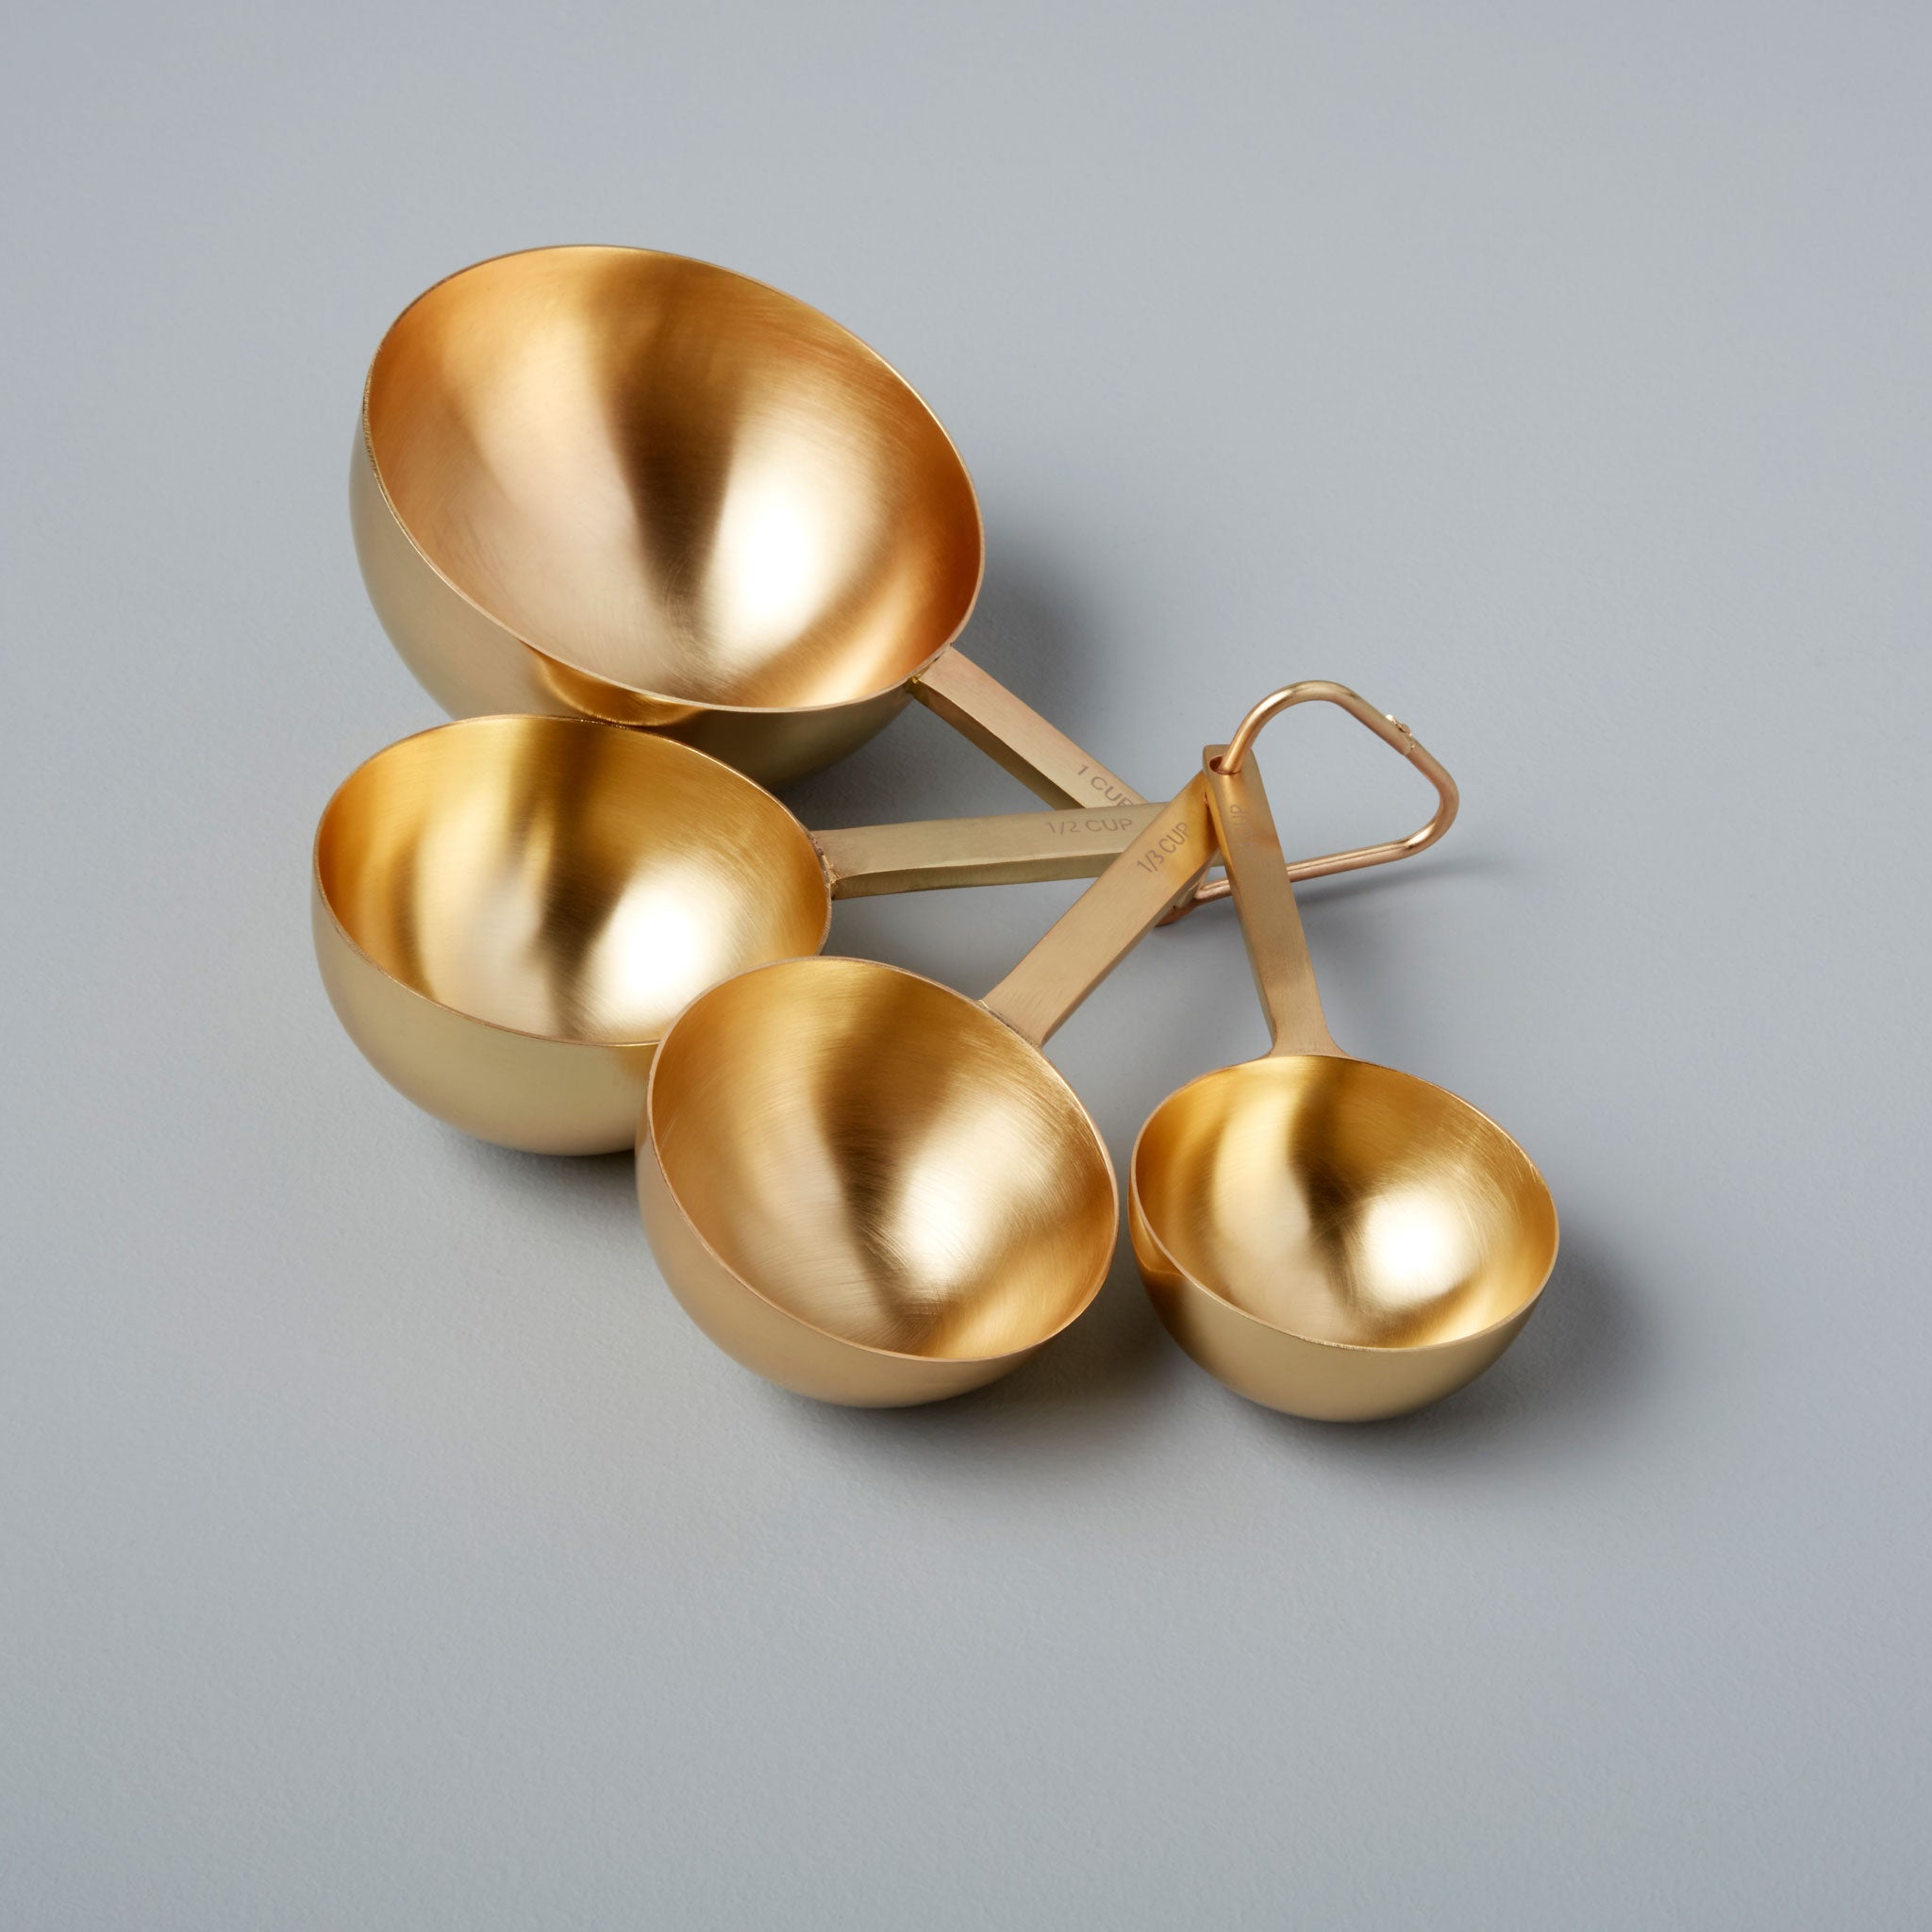 Gold Marble Measuring Cups/Spoons